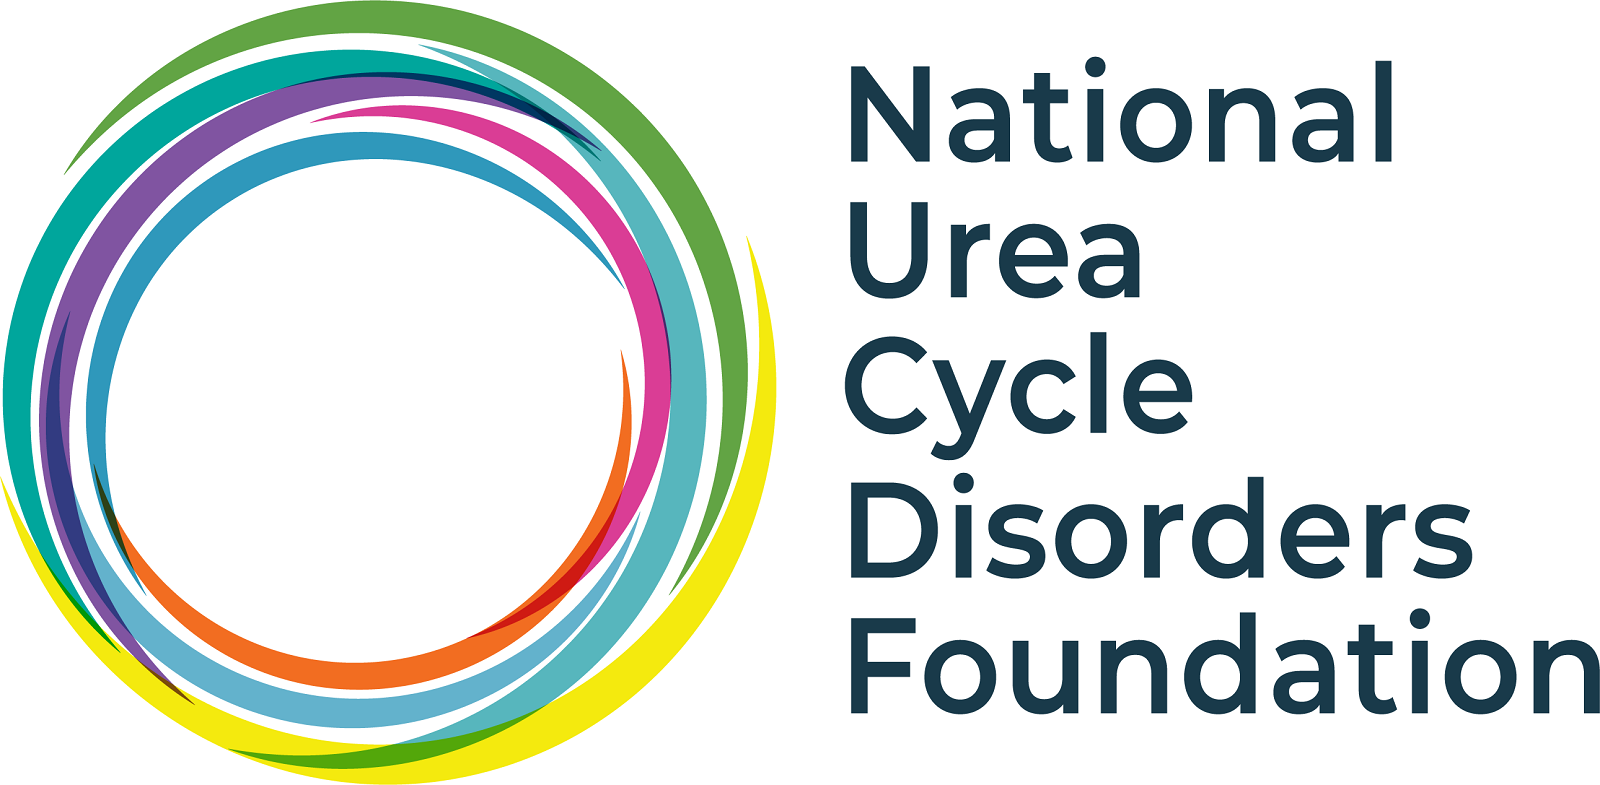 National Urea Cycle Disorders Foundation